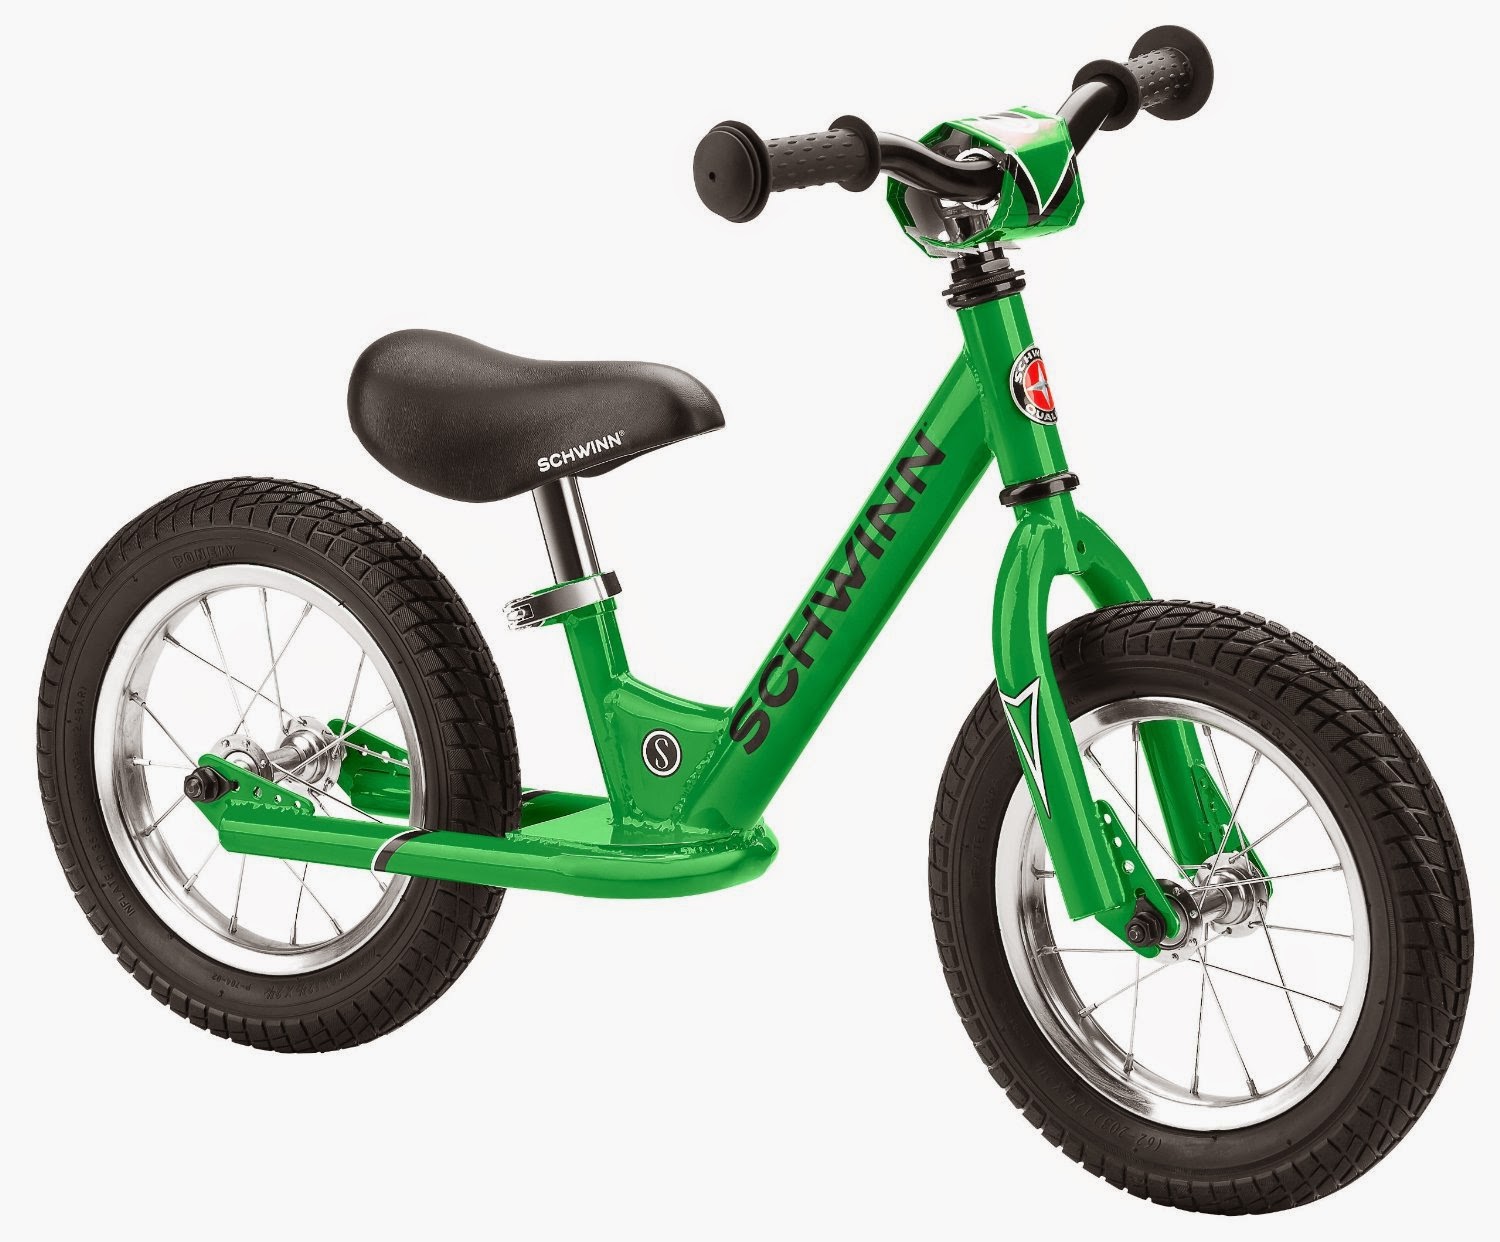 Schwinn 12" Balance Bike in Green, picture, image, review features and specifications